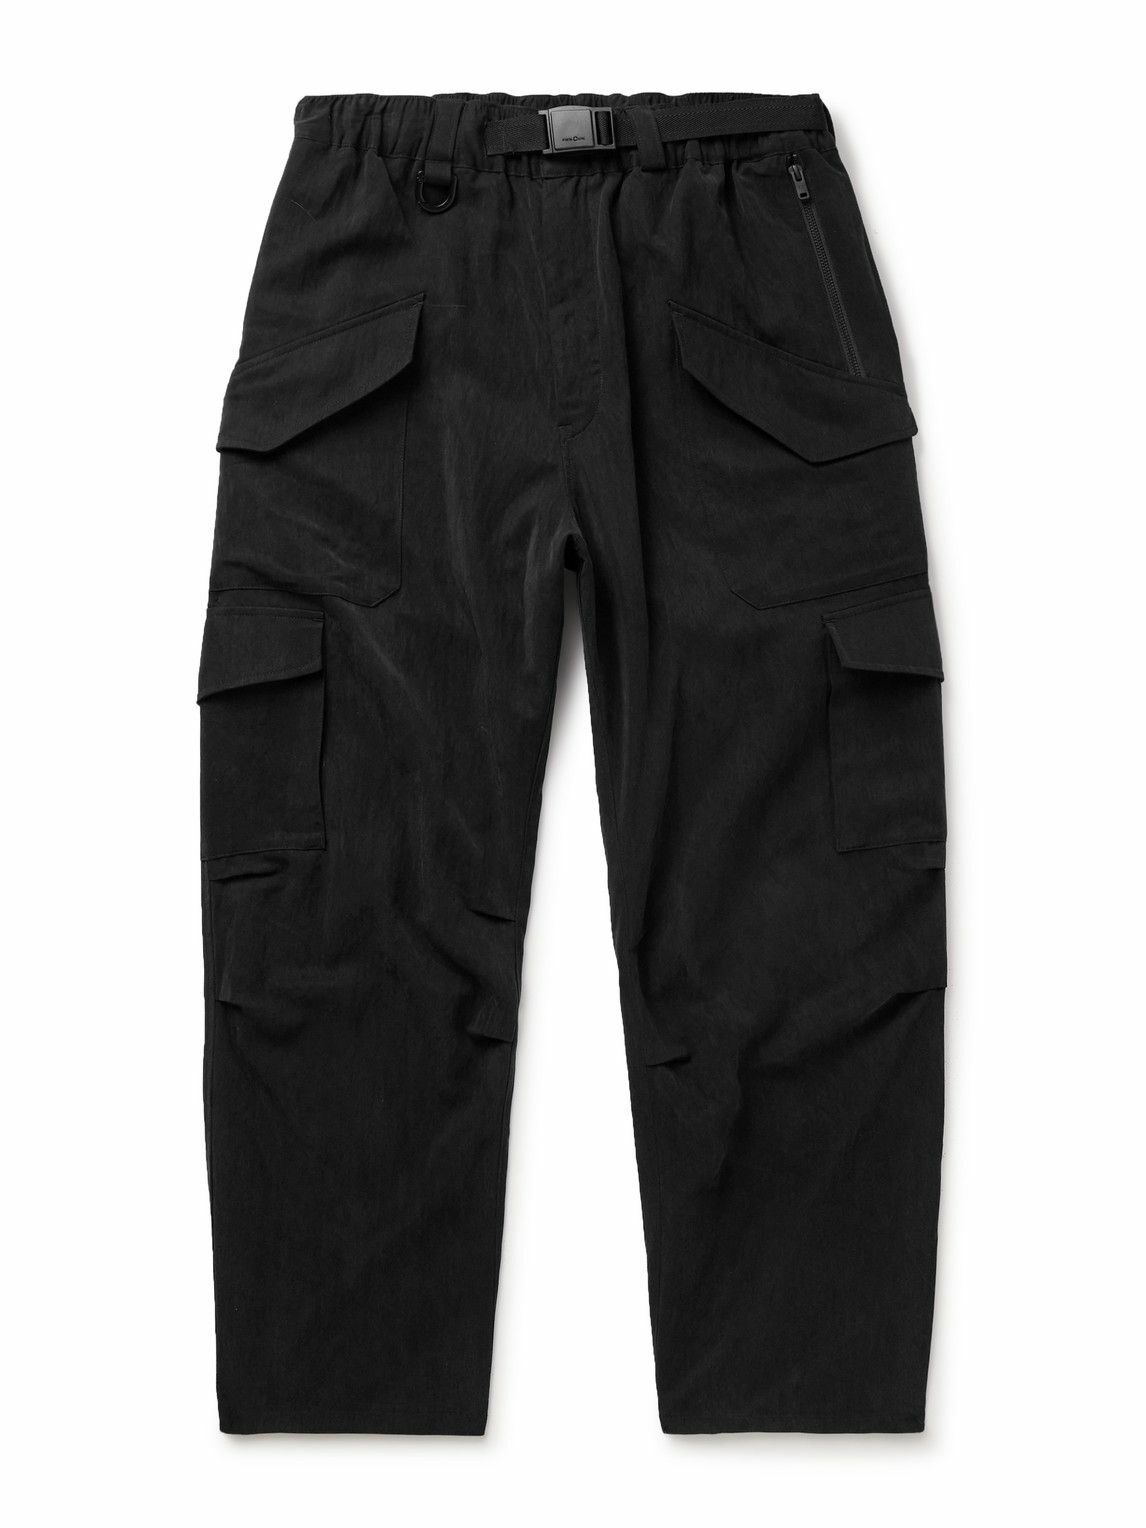 Men's Belted Twill Cargo Pant 